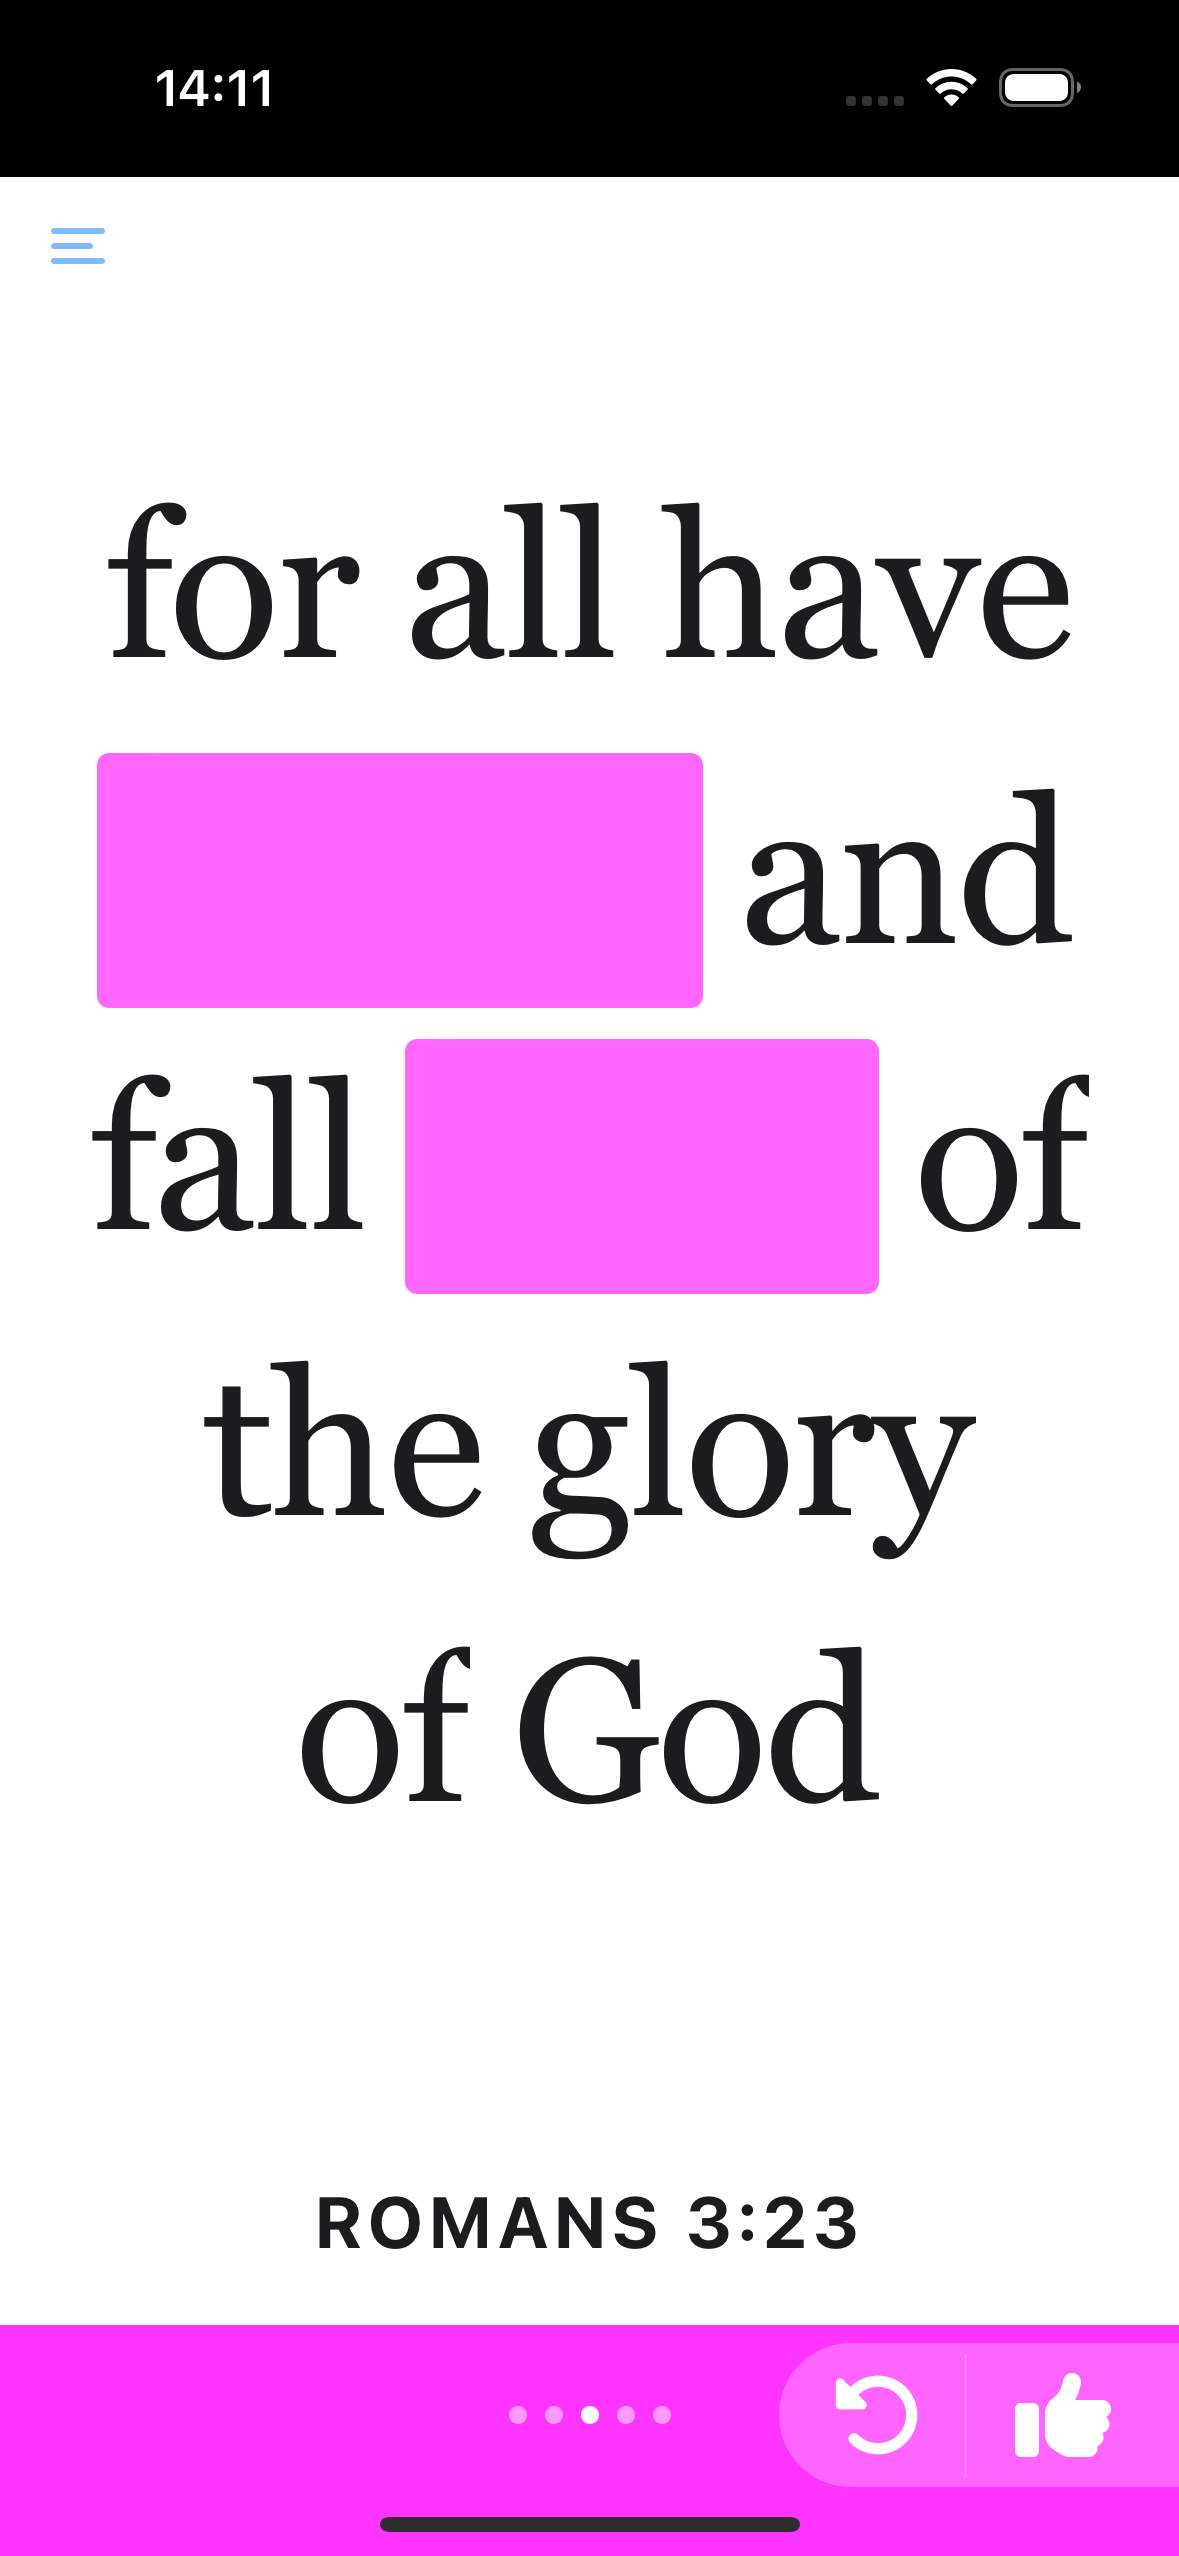 Screenshot of the app showing Romans 3:23 with two words hidden